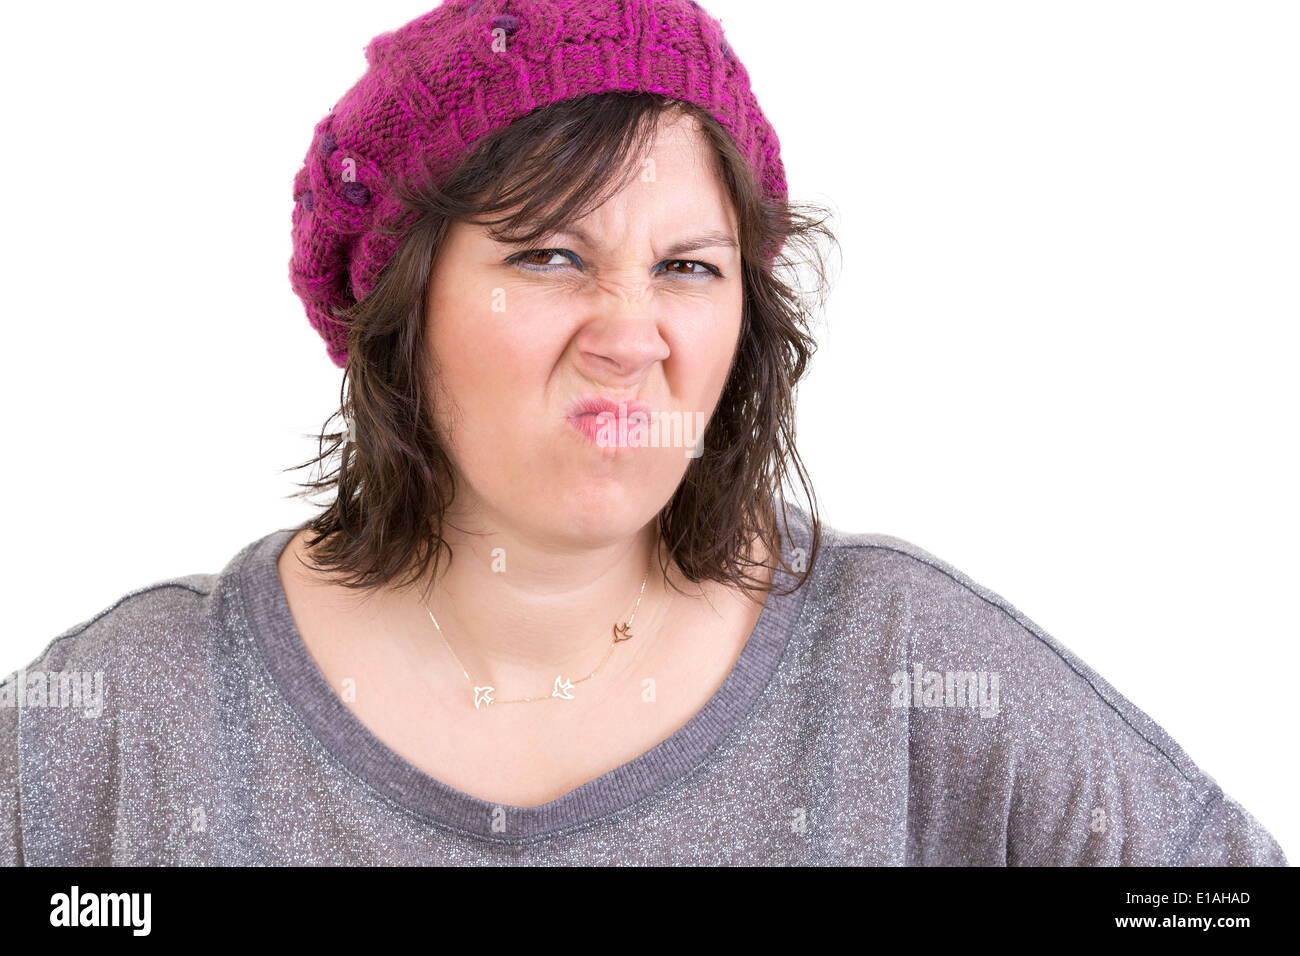 Disdainful woman in a purple knitted beanie screwing up her nose in disgust and dislike, head and shoulders isolated on white Stock Photo